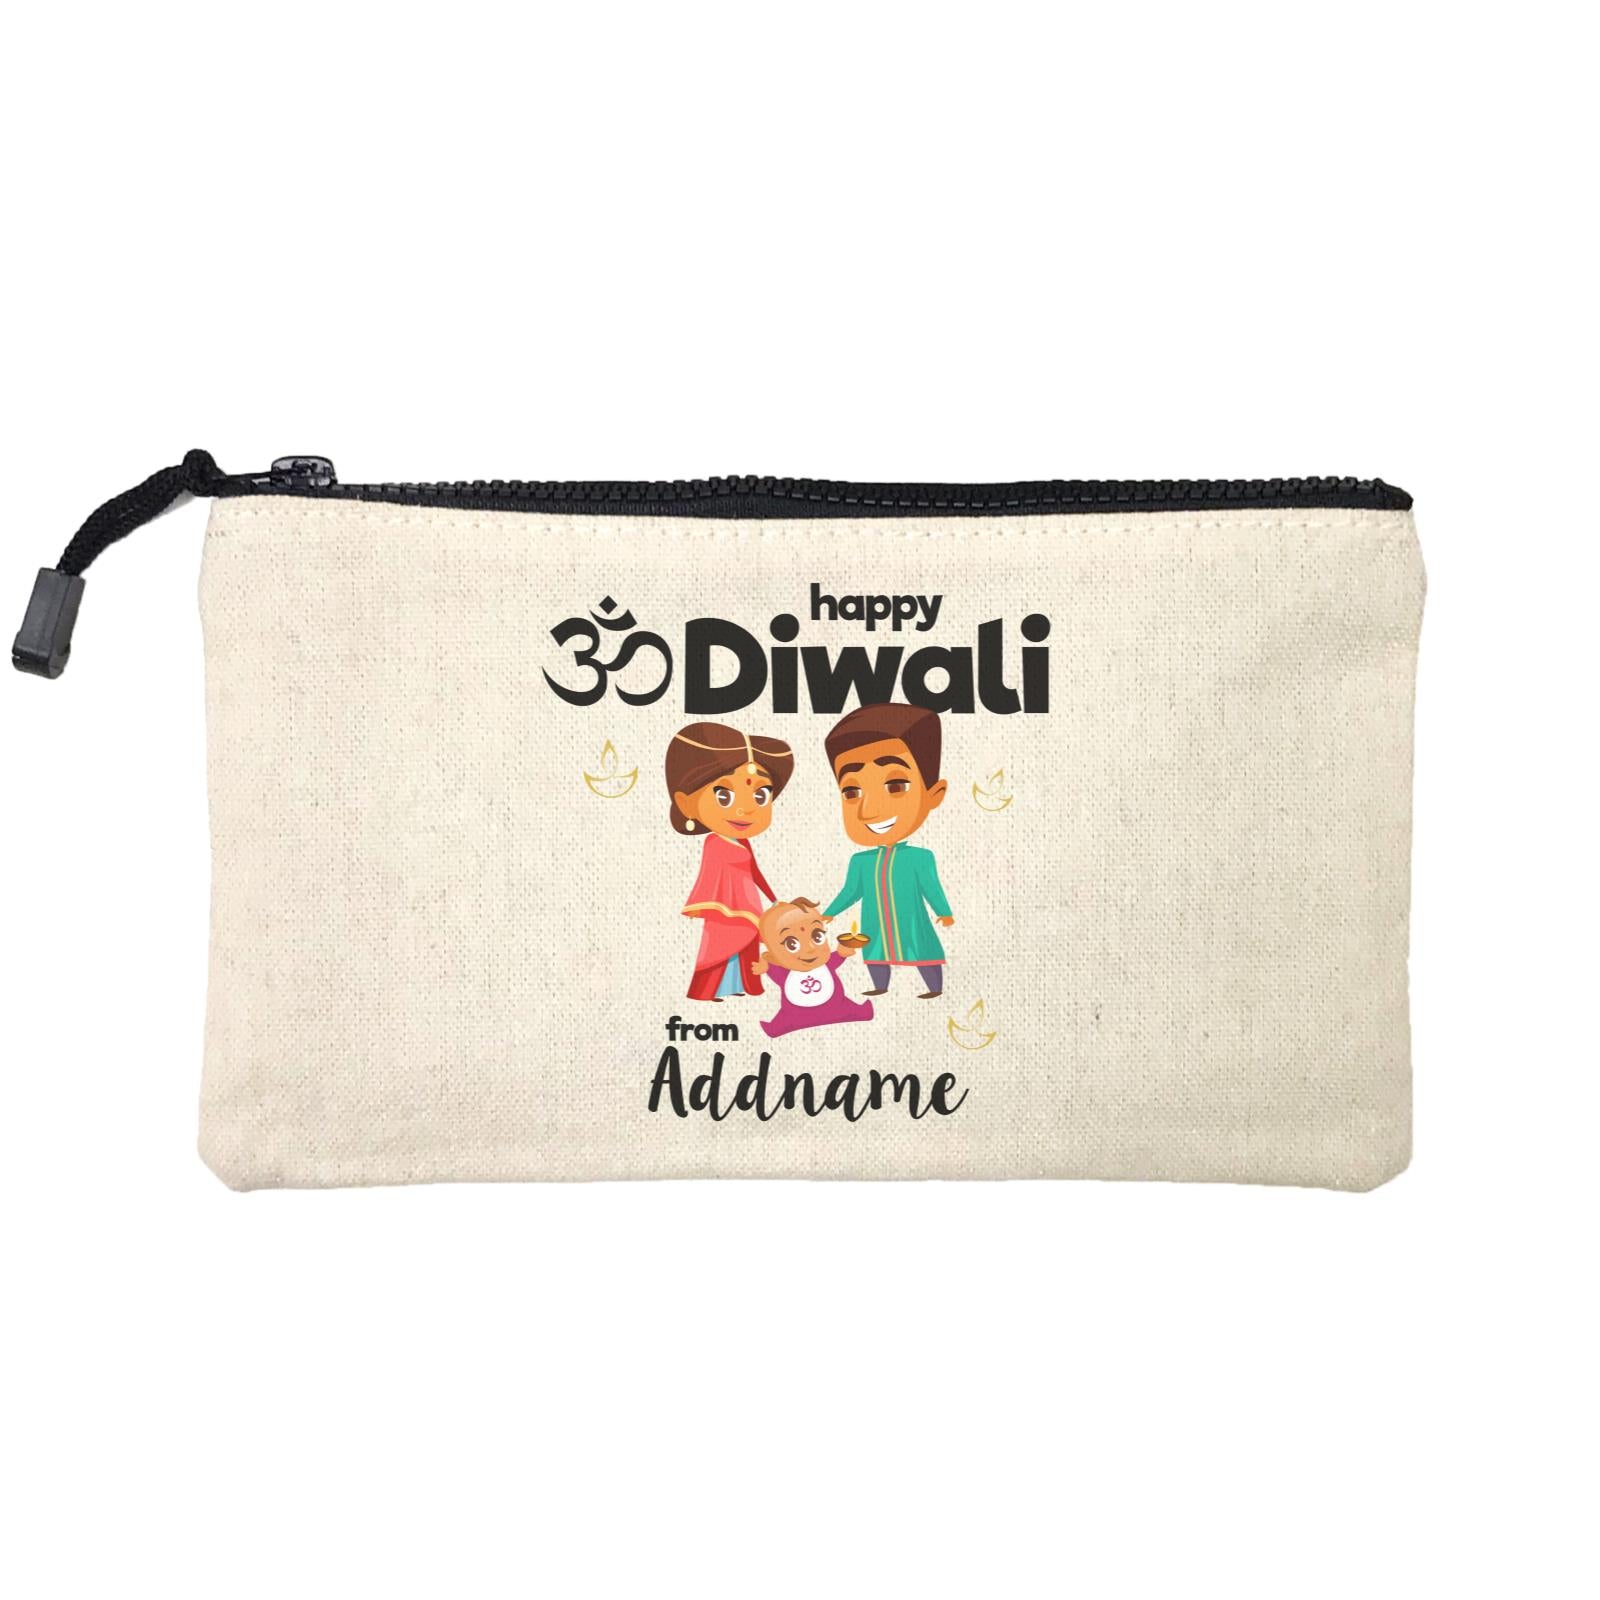 Cute Family Of Three OM Happy Diwali From Addname Mini Accessories Stationery Pouch